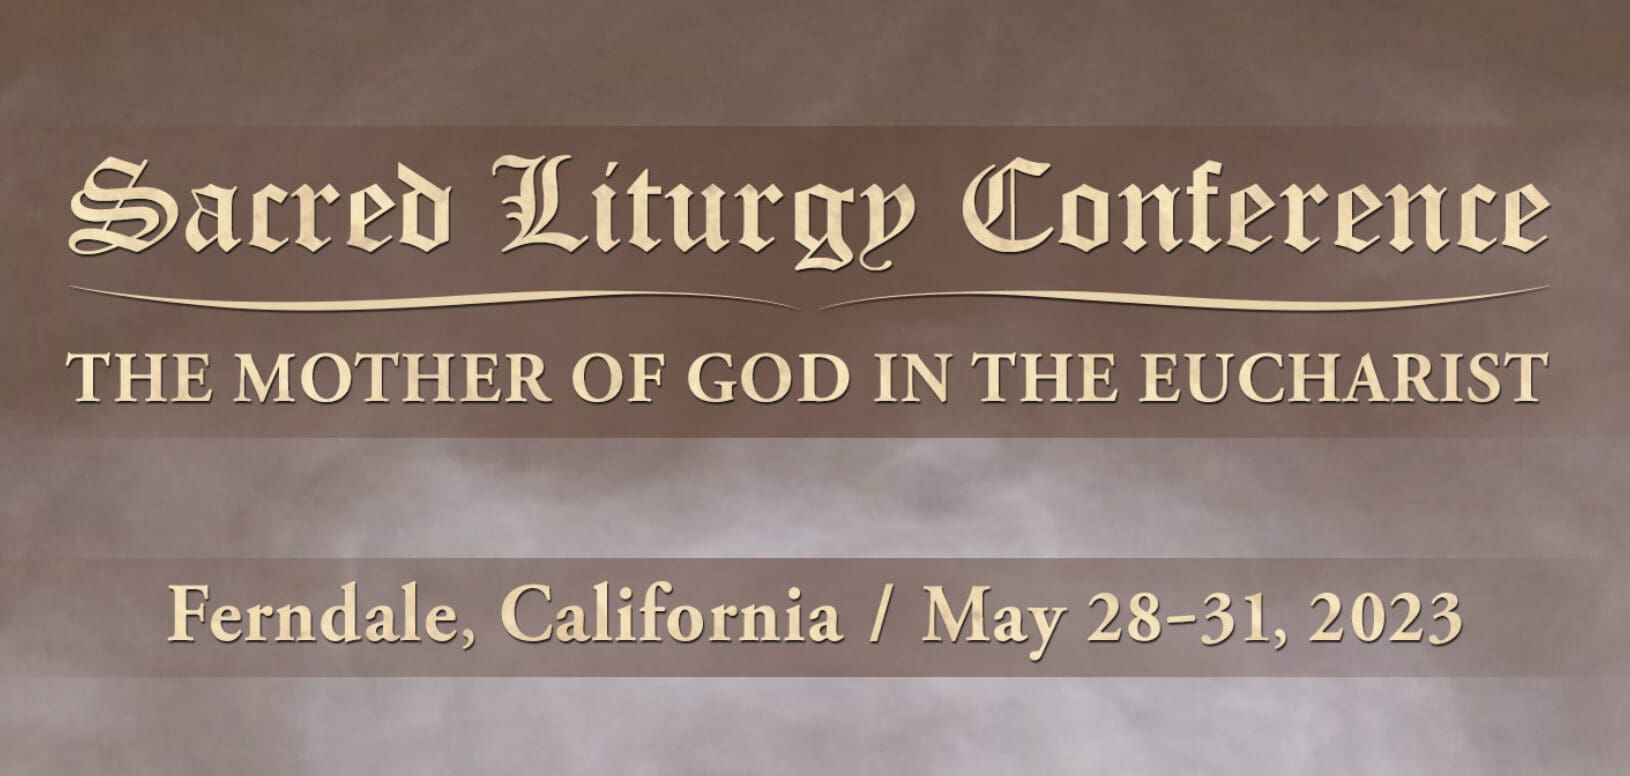 Sacred Liturgy Conference: The Mother of God in the Eucharist